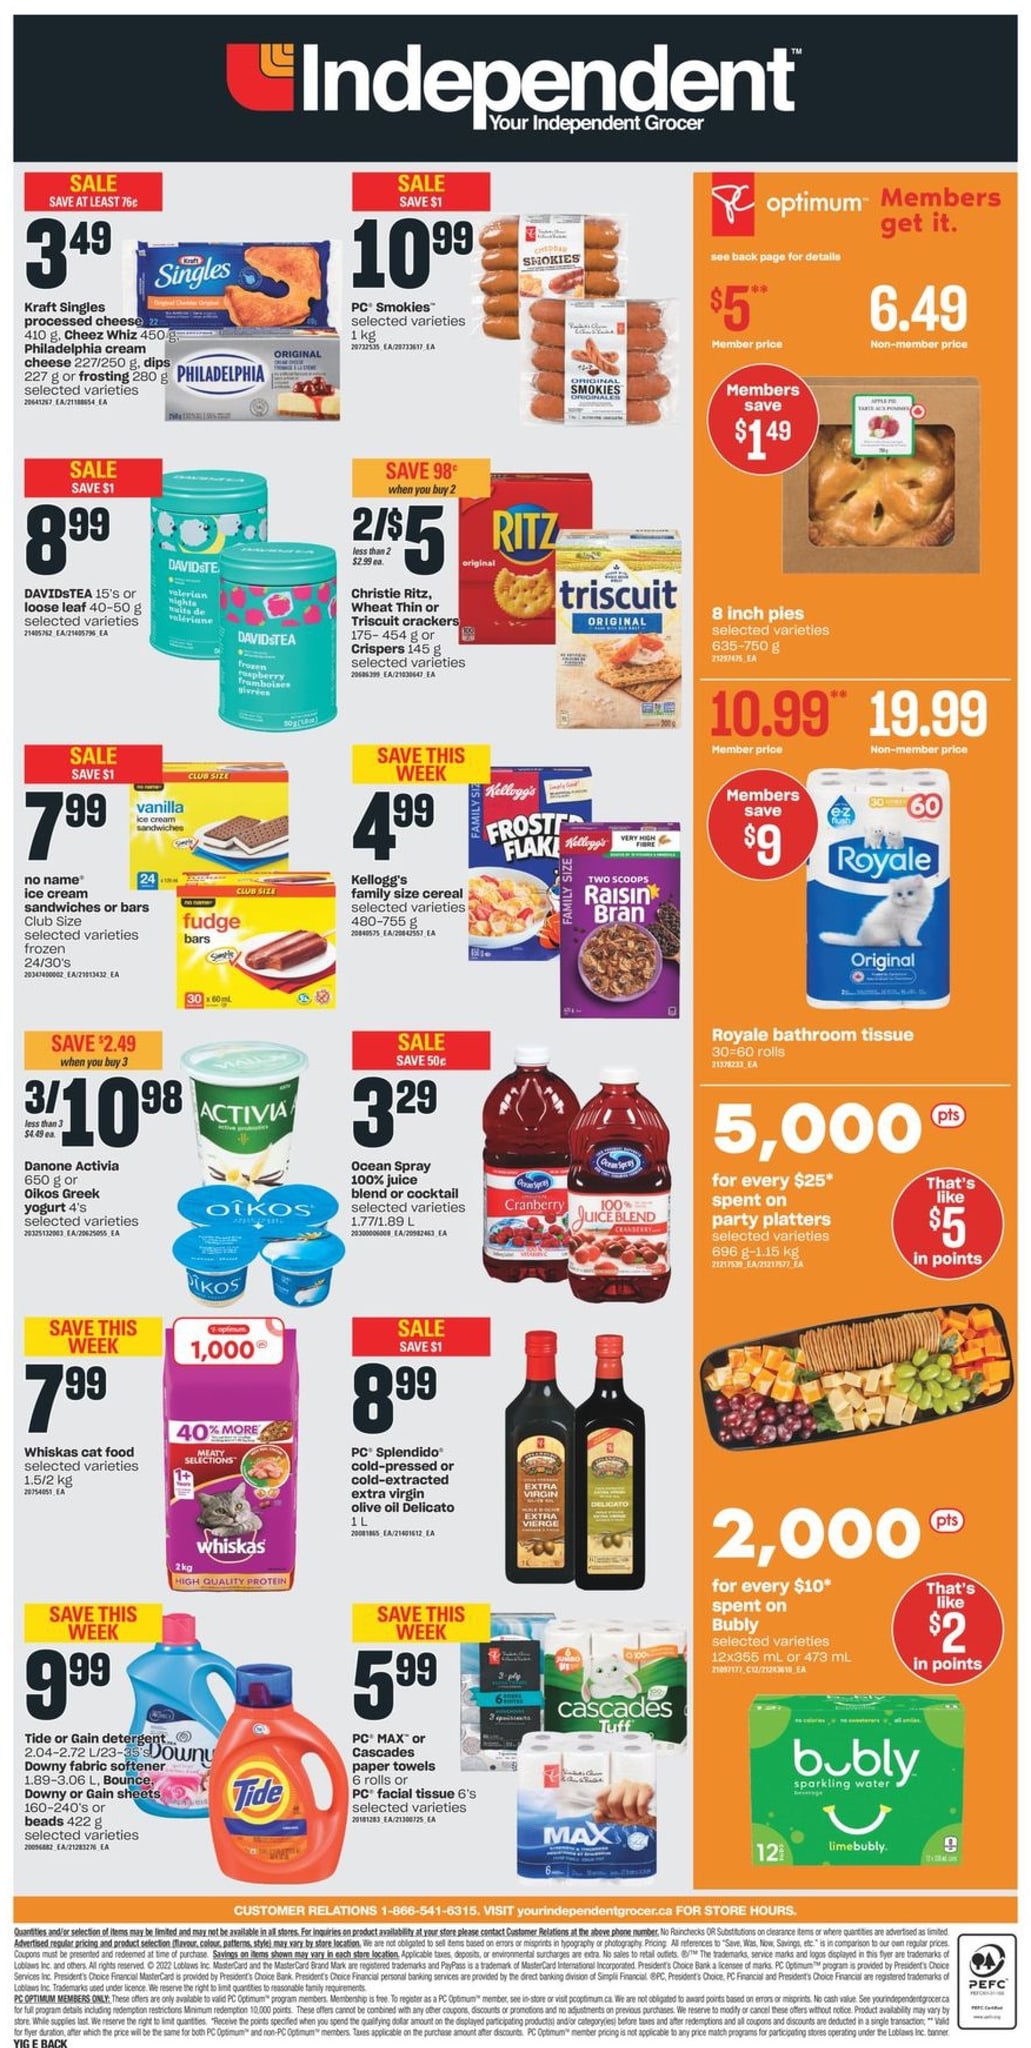 Independent Ontario - Weekly Flyer Specials - Page 3